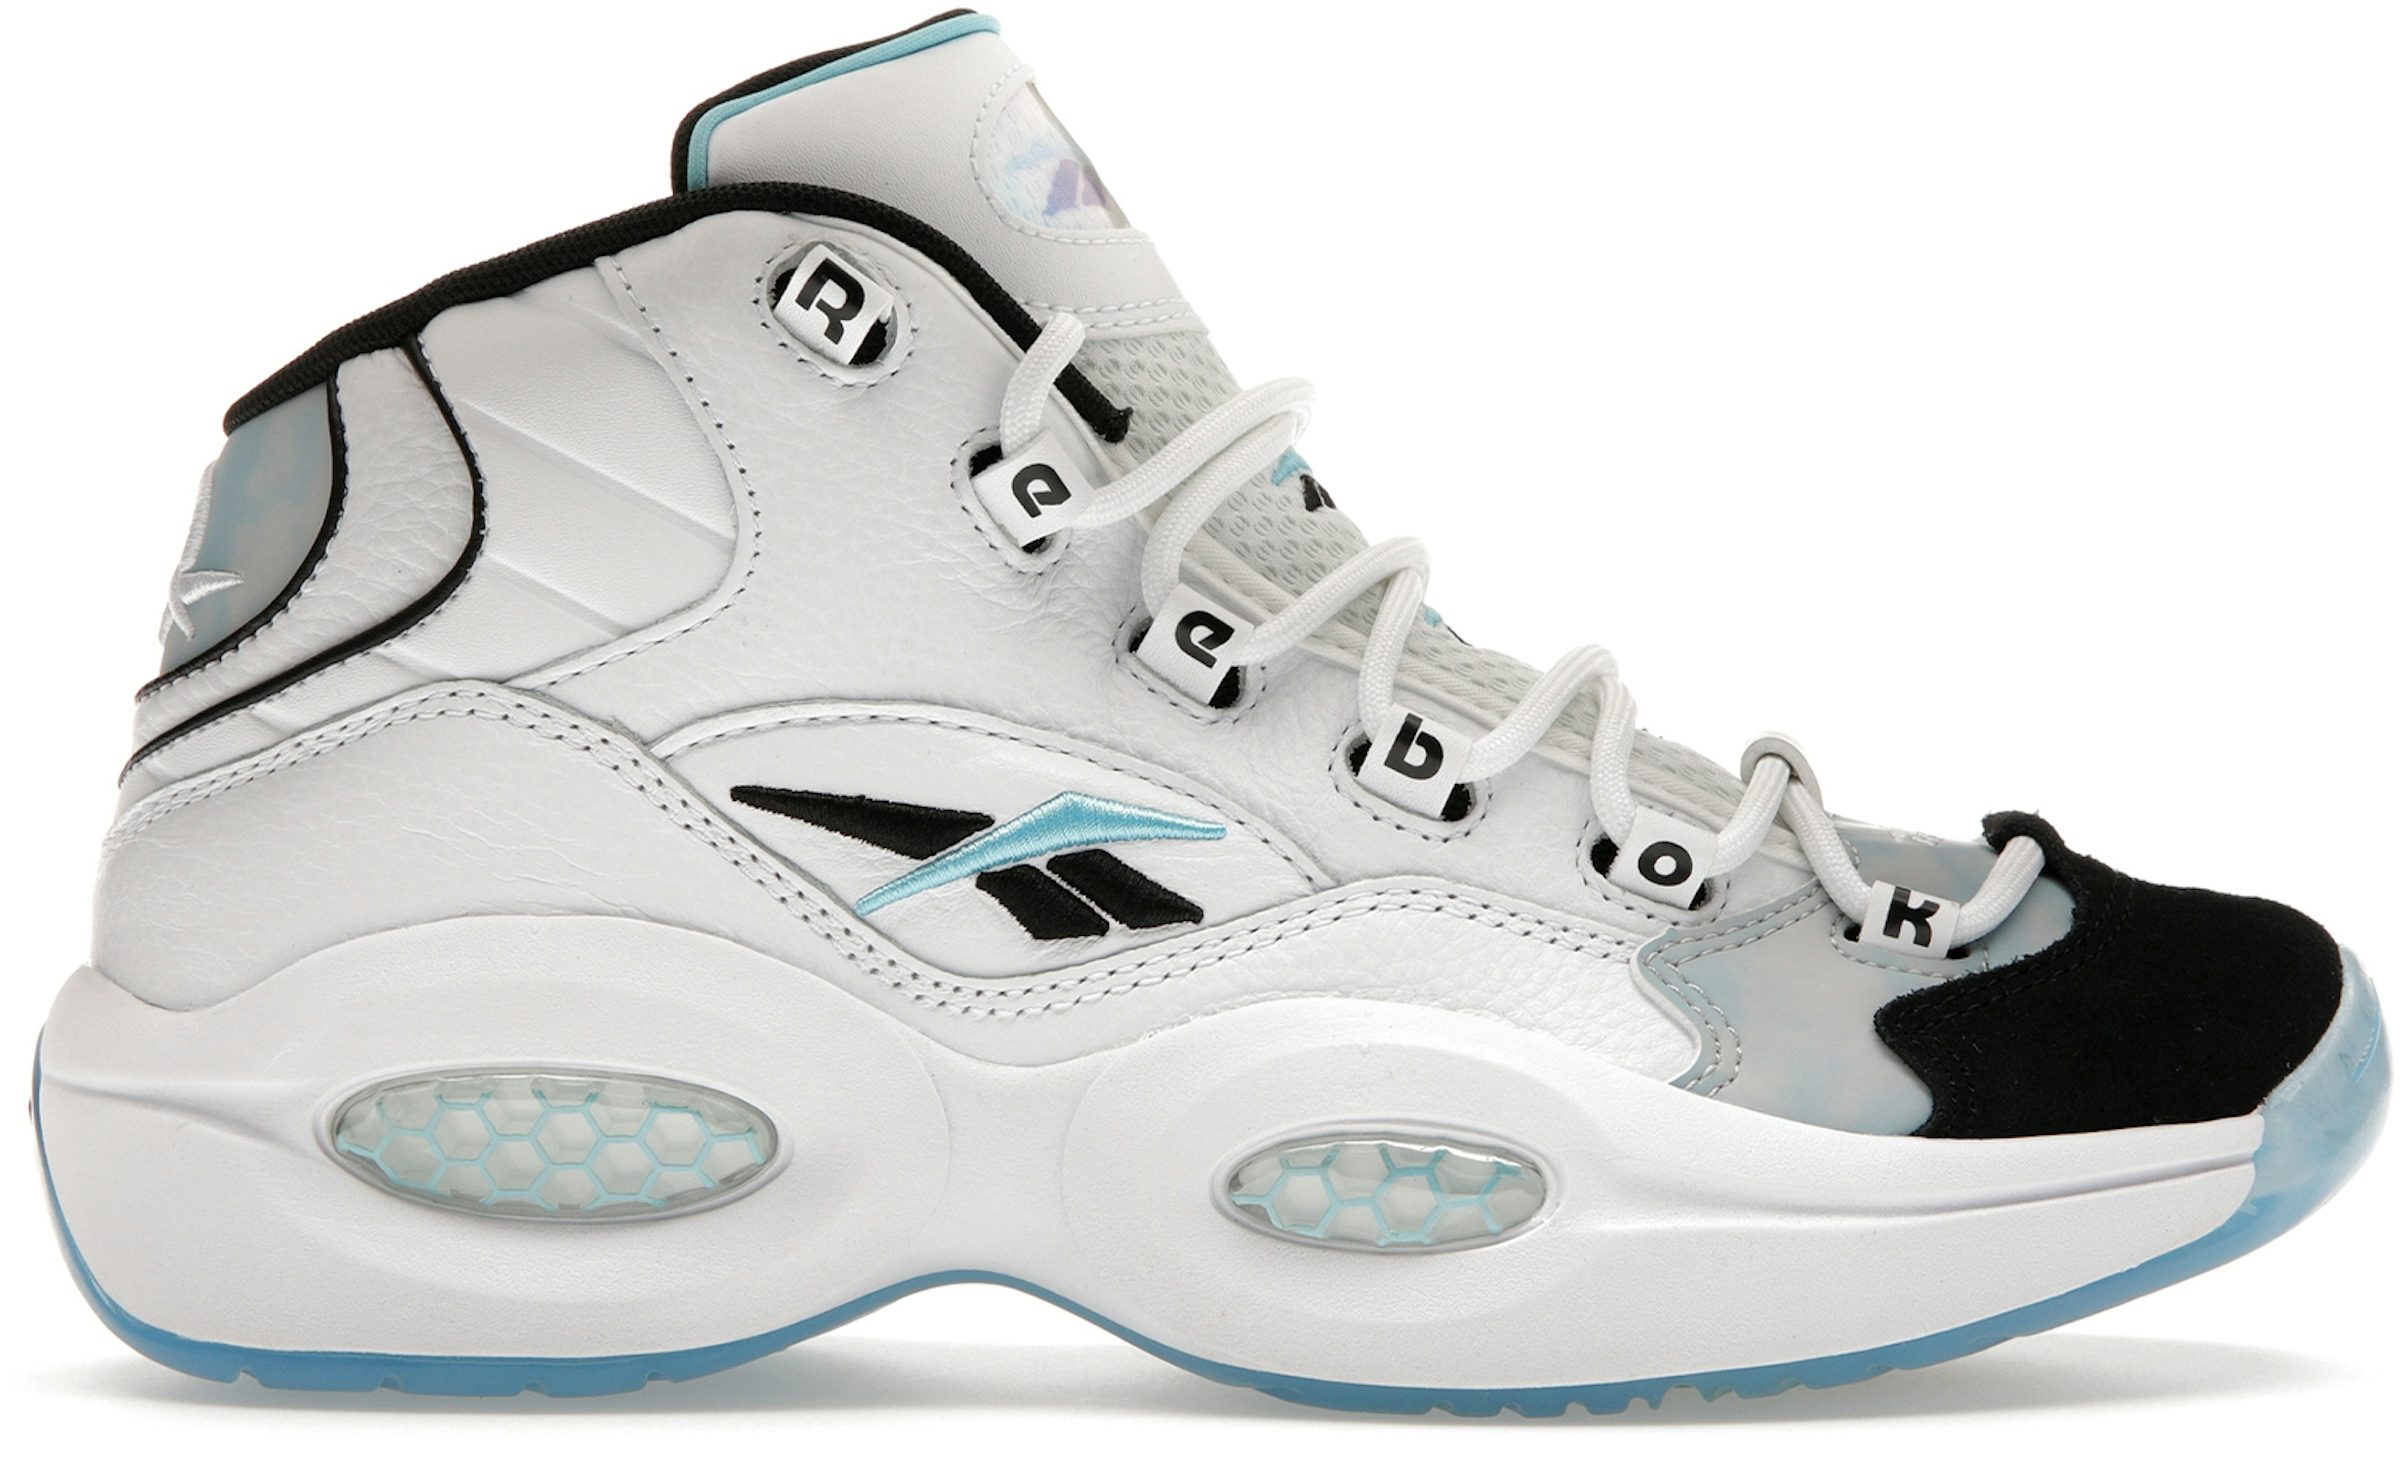 Reebok/Panini collaboration: Allen Iverson Question Mid and Low Prizm  collection - The Athletic